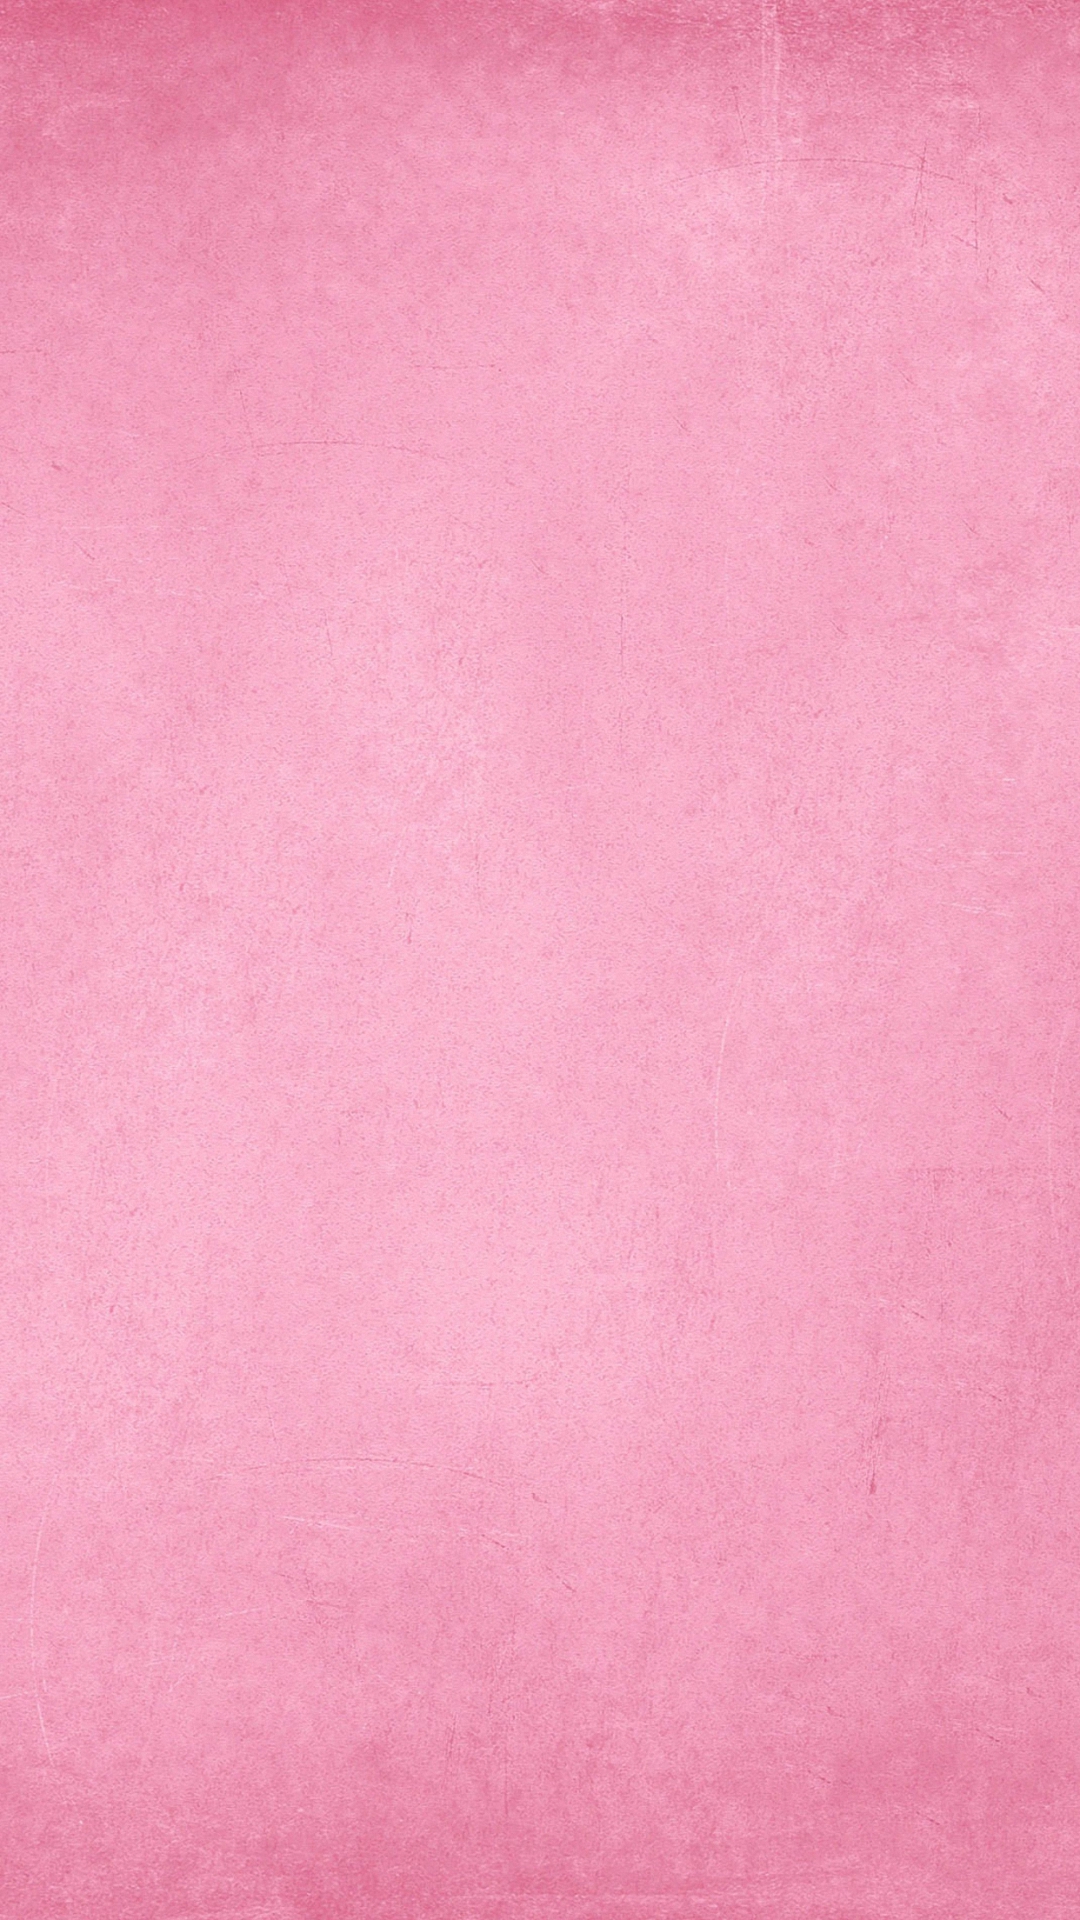 HD Cool Pink iPhone Background